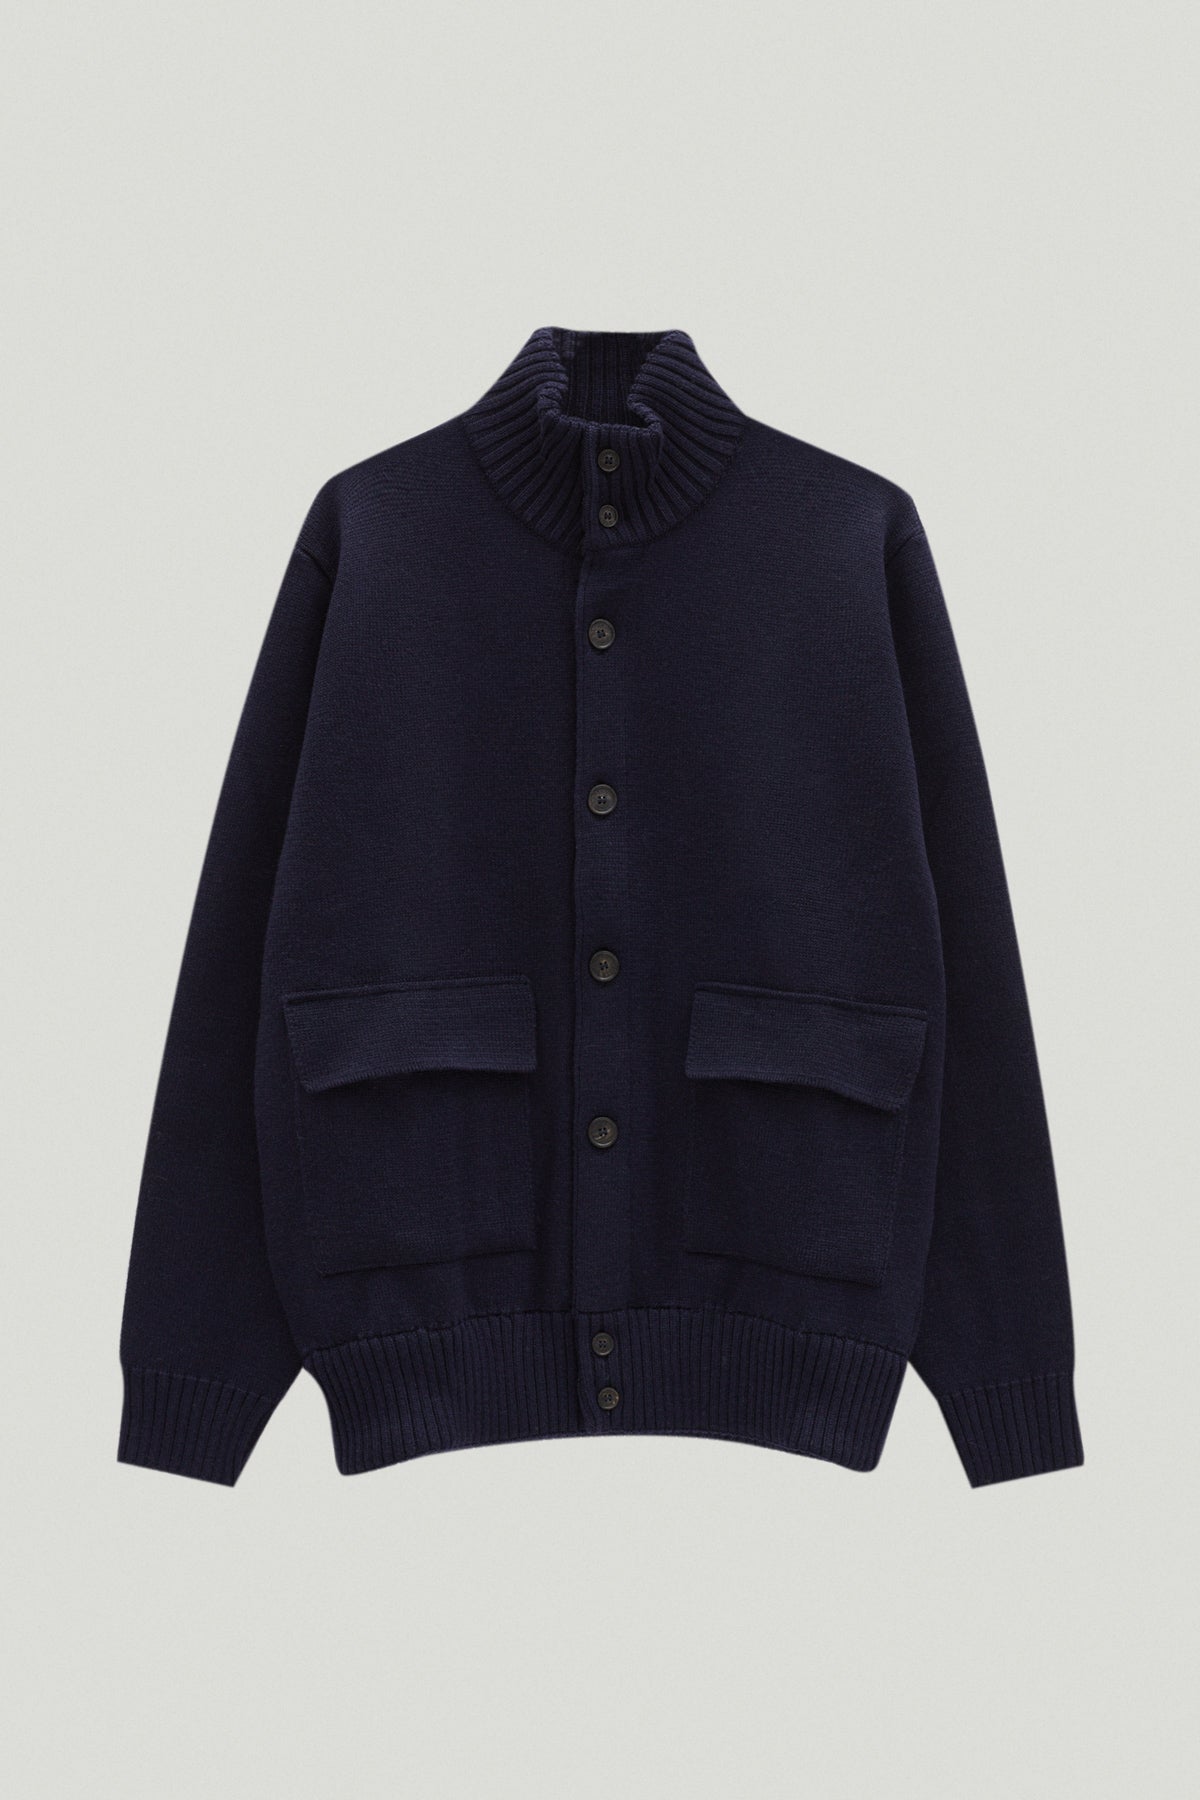 Oxford Blue | The Merino Wool Patch Pocket Jacket – Imperfect Version